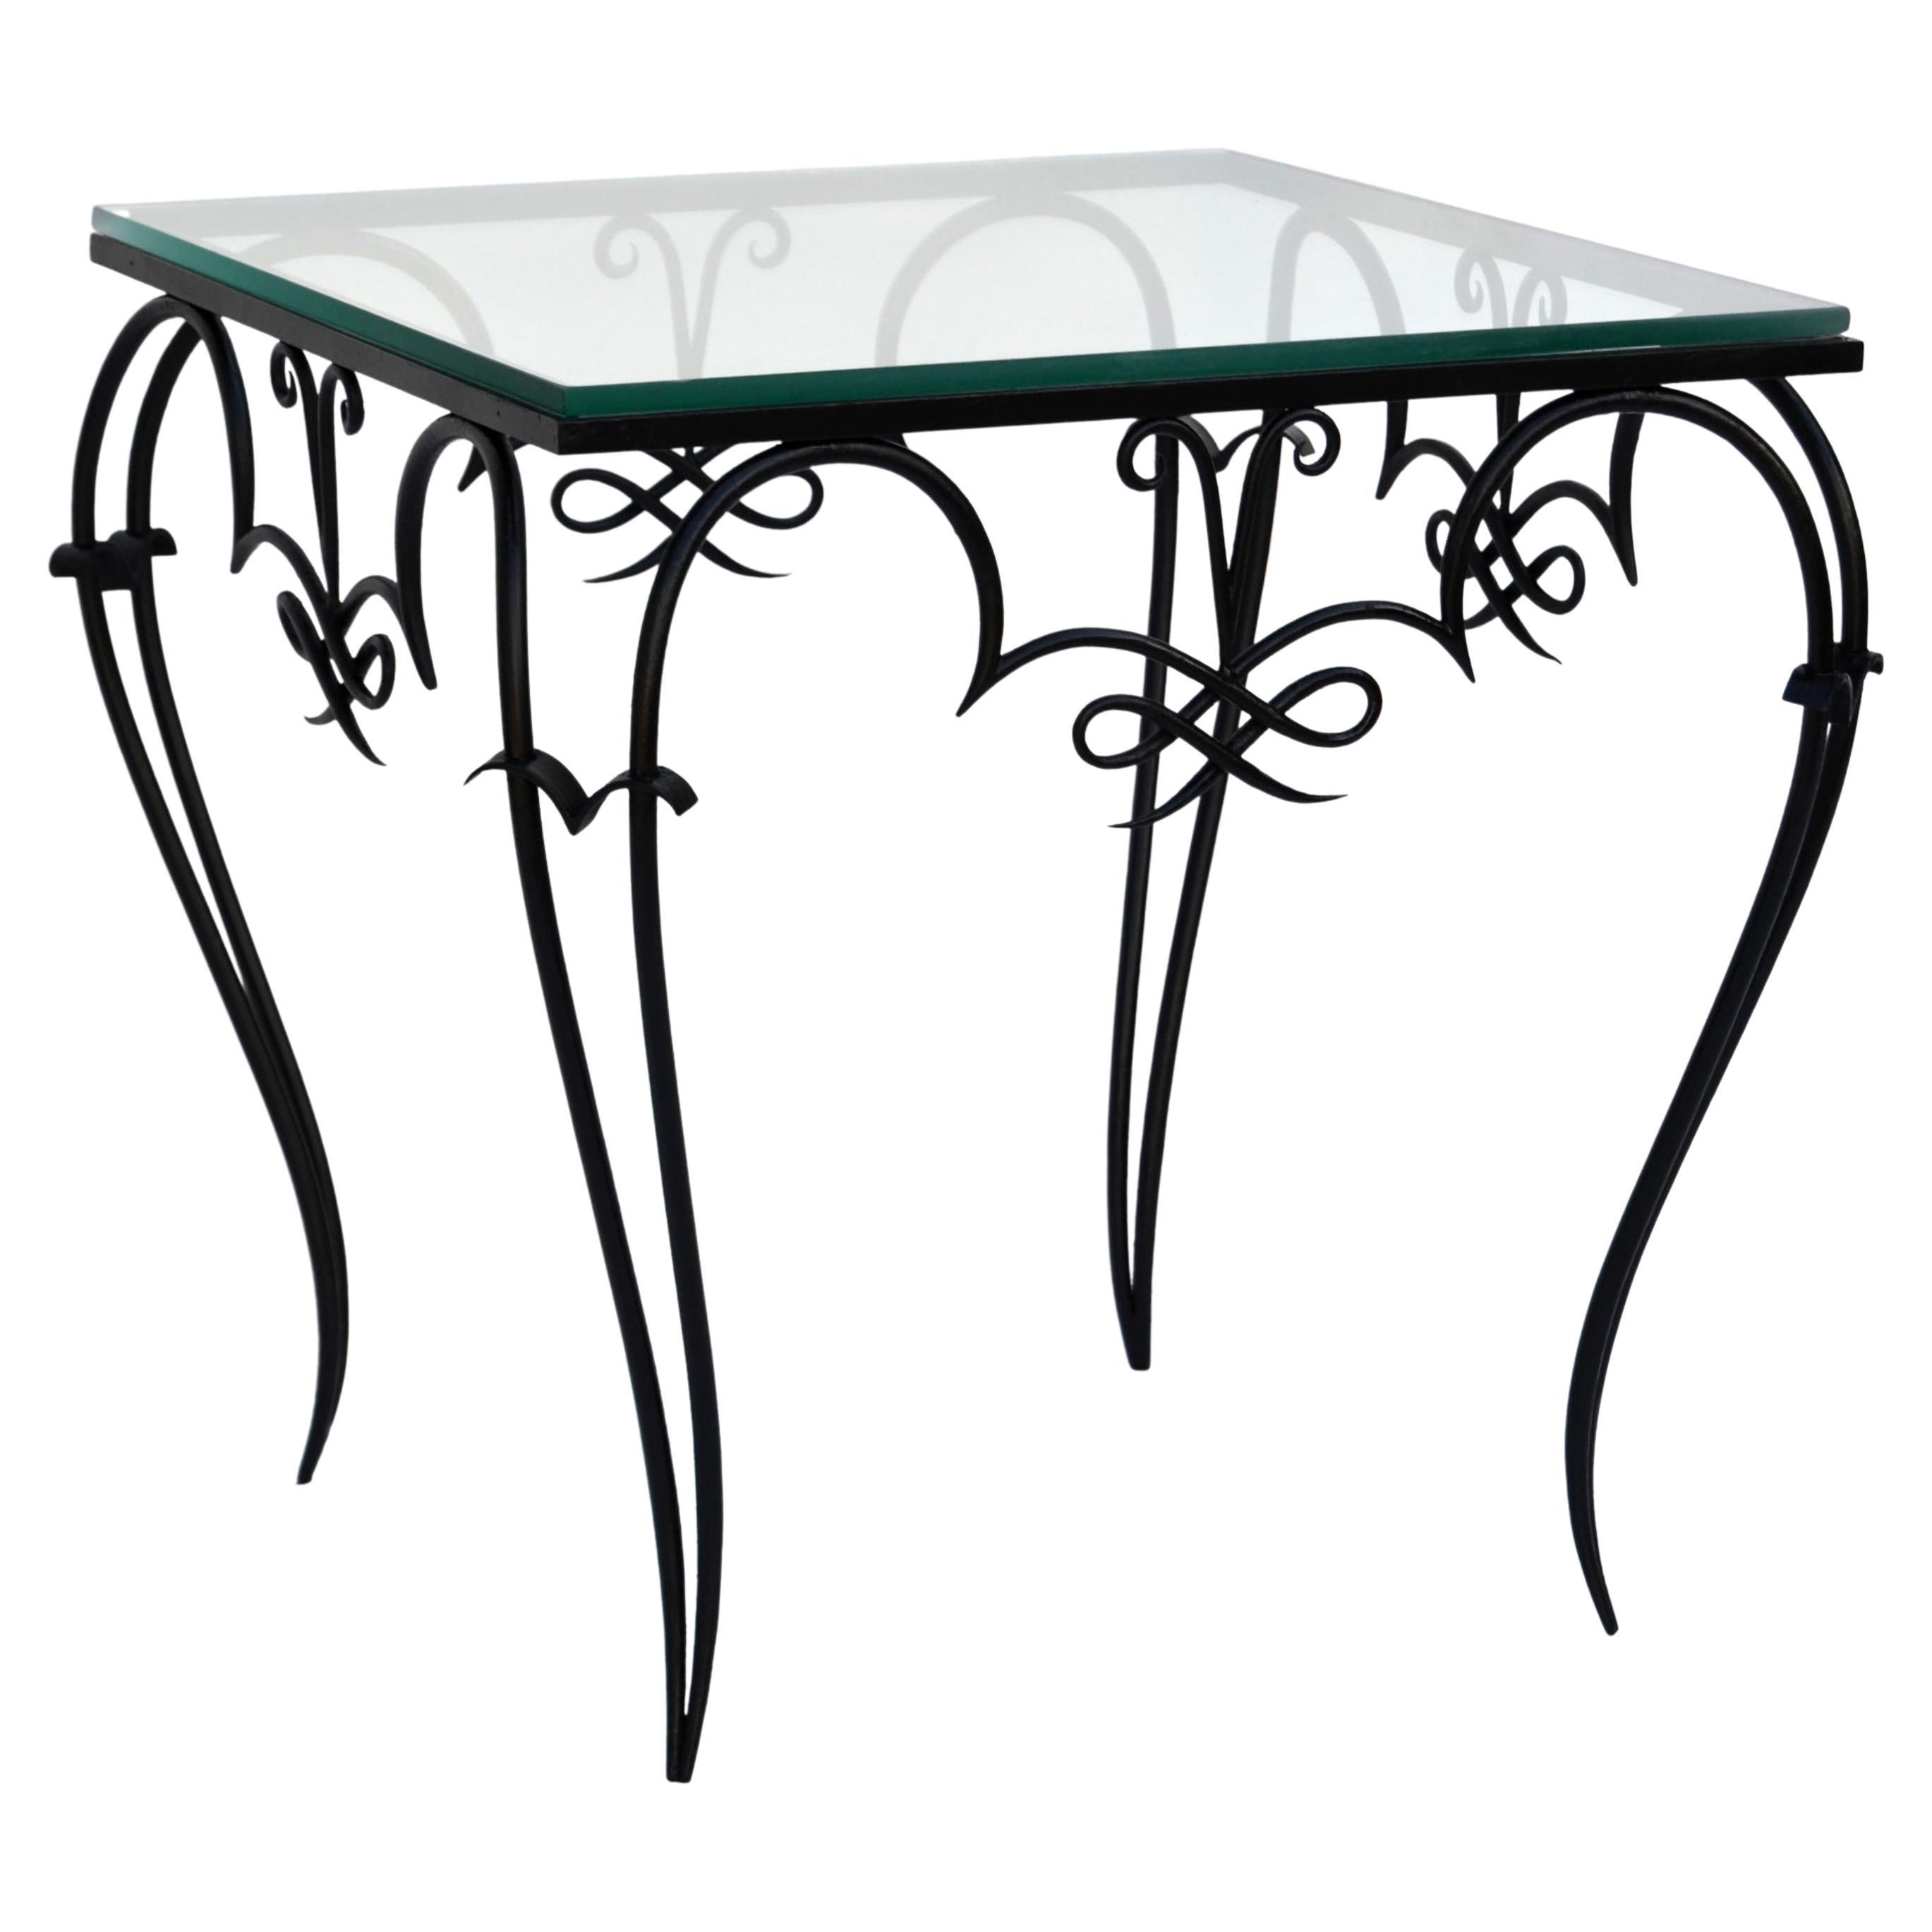 René Prou Style Art Deco Black Wrought Iron & Glass Top Side Table France, 1940 For Sale